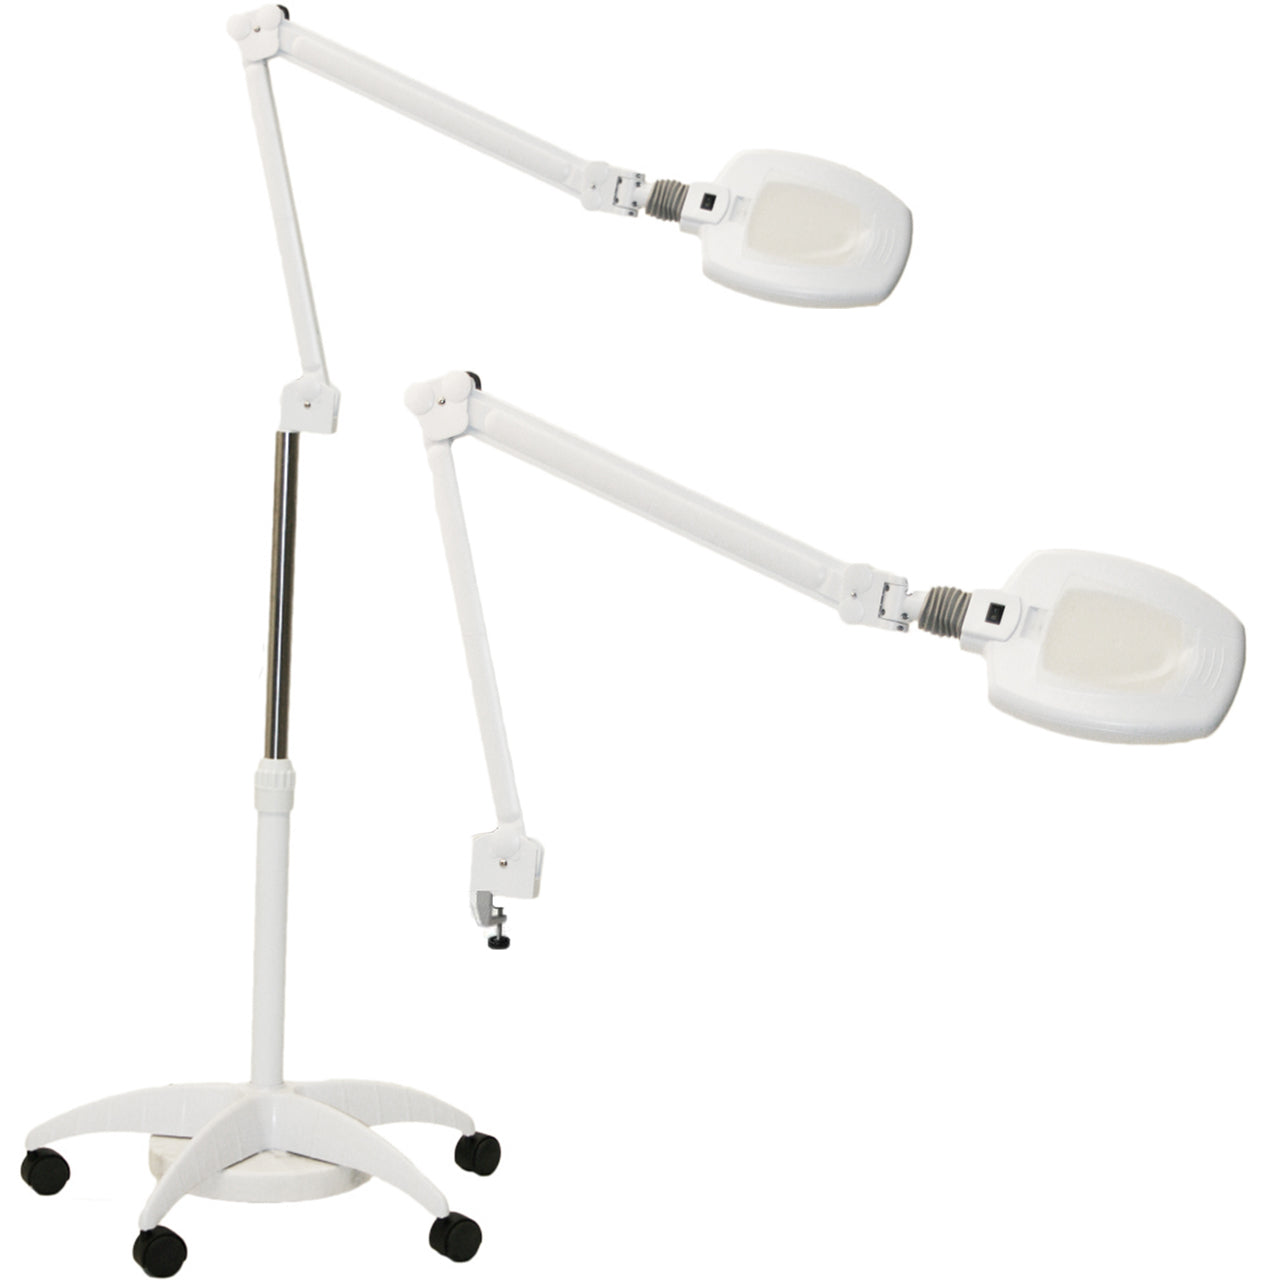 Erza LED Five Diopter Magnifying Lamp